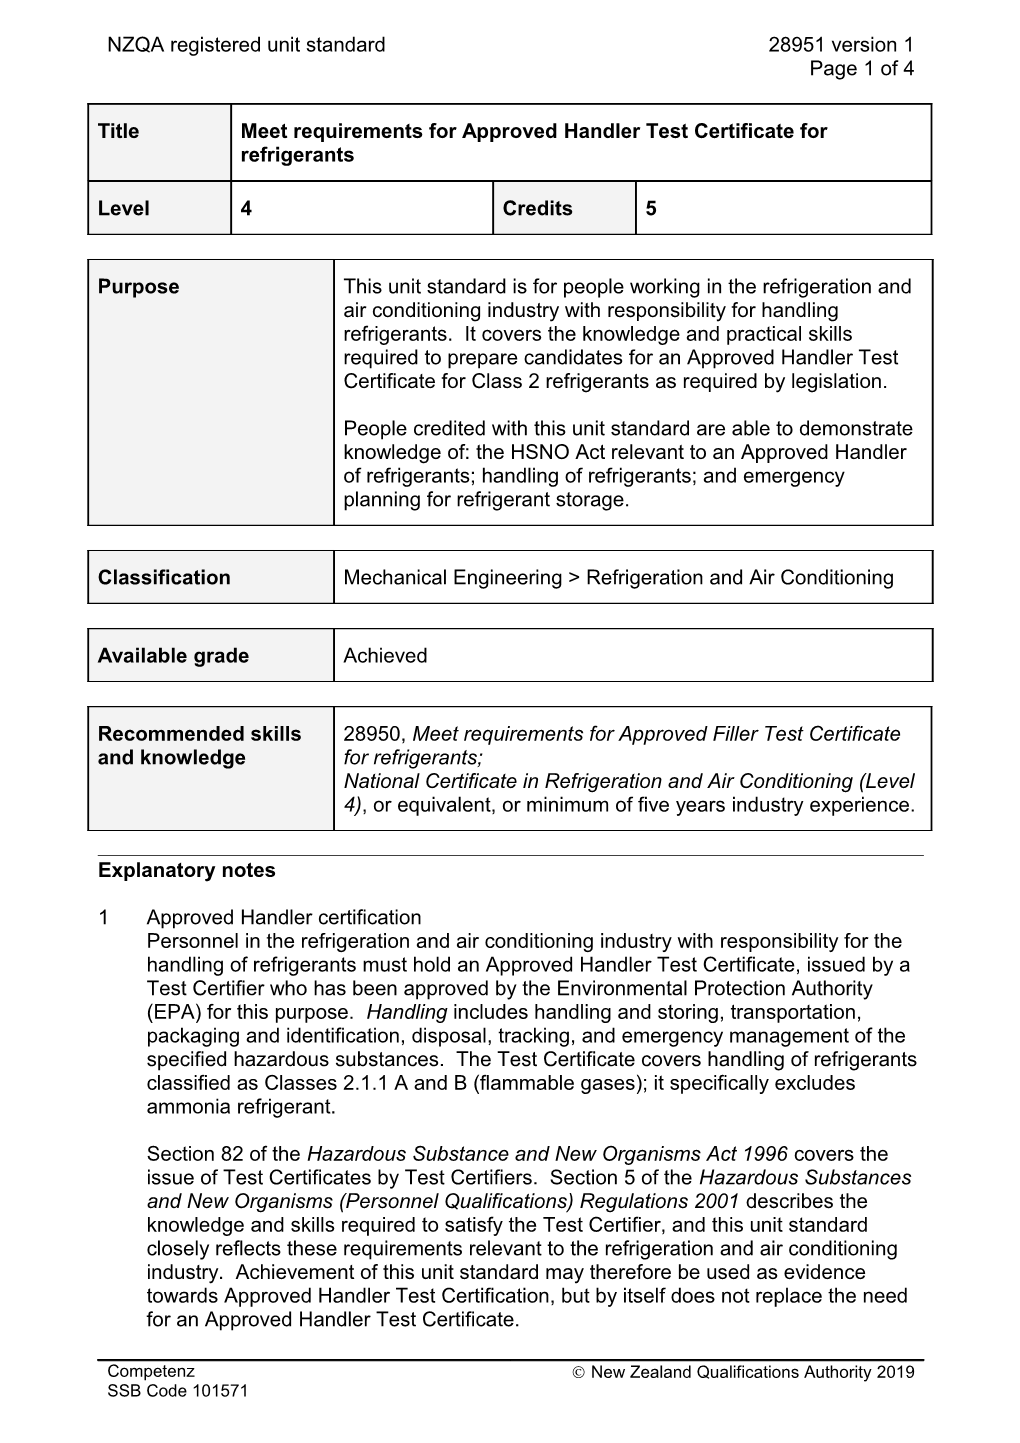 28951 Meet Requirements for Approved Handler Test Certificate for Refrigerants